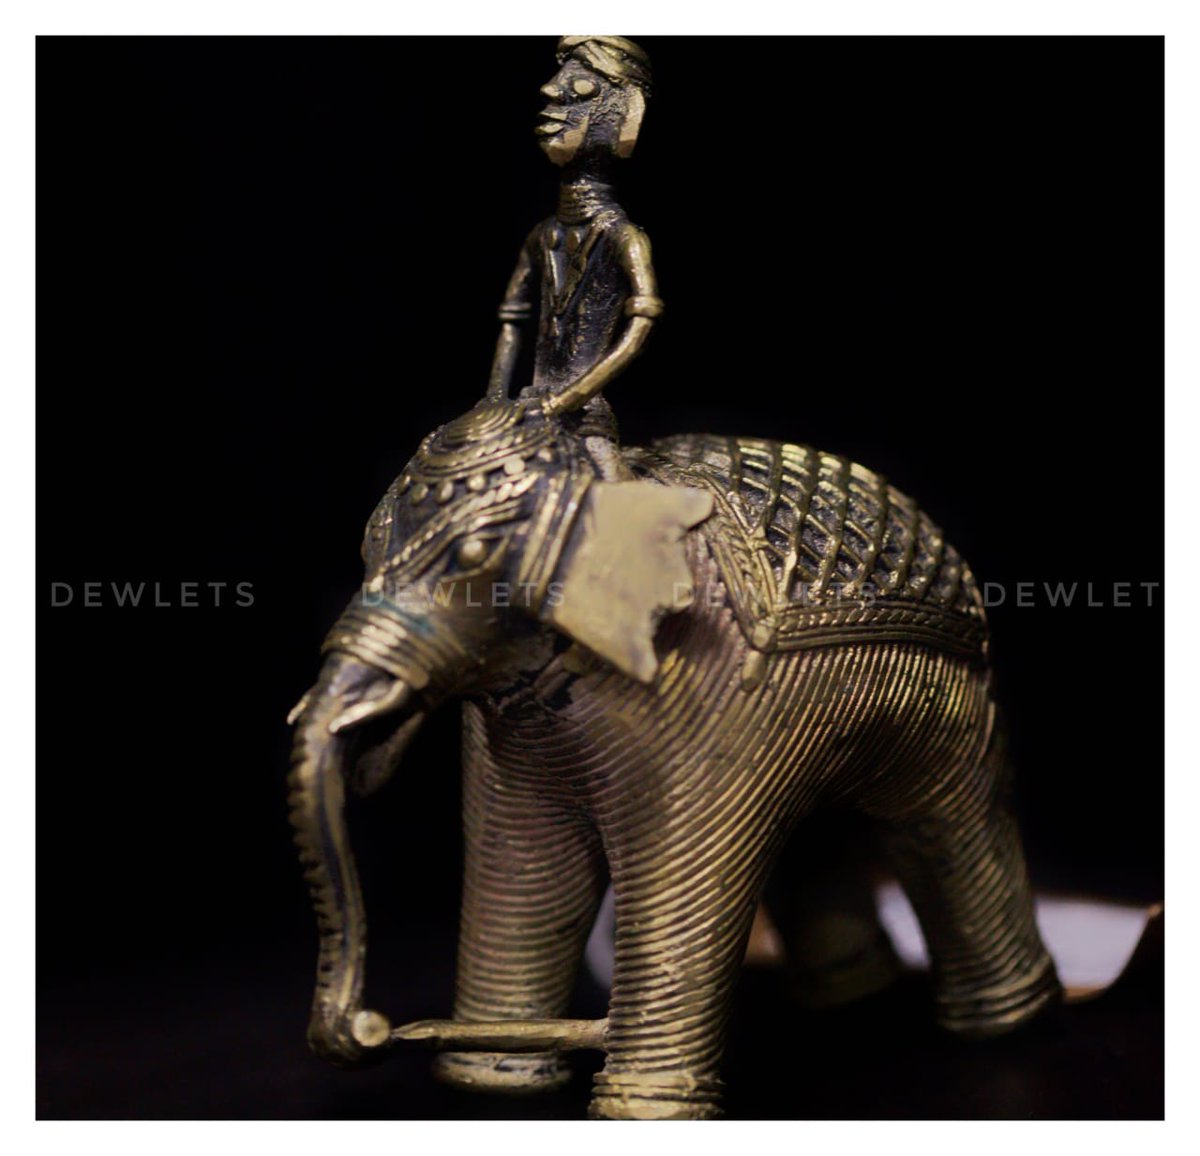 Elephant art made of metal . Hand picked from Chattisgarh. #wearehandpickers 
 #handcraftedwithlove #indianhandicrafts #shoppersparadise #supportsmallbusiness #madeinindia #trivandrumshopping #elephantart #metalart  #metalhandicraft #elephantmetalart #handpicked #tribalart